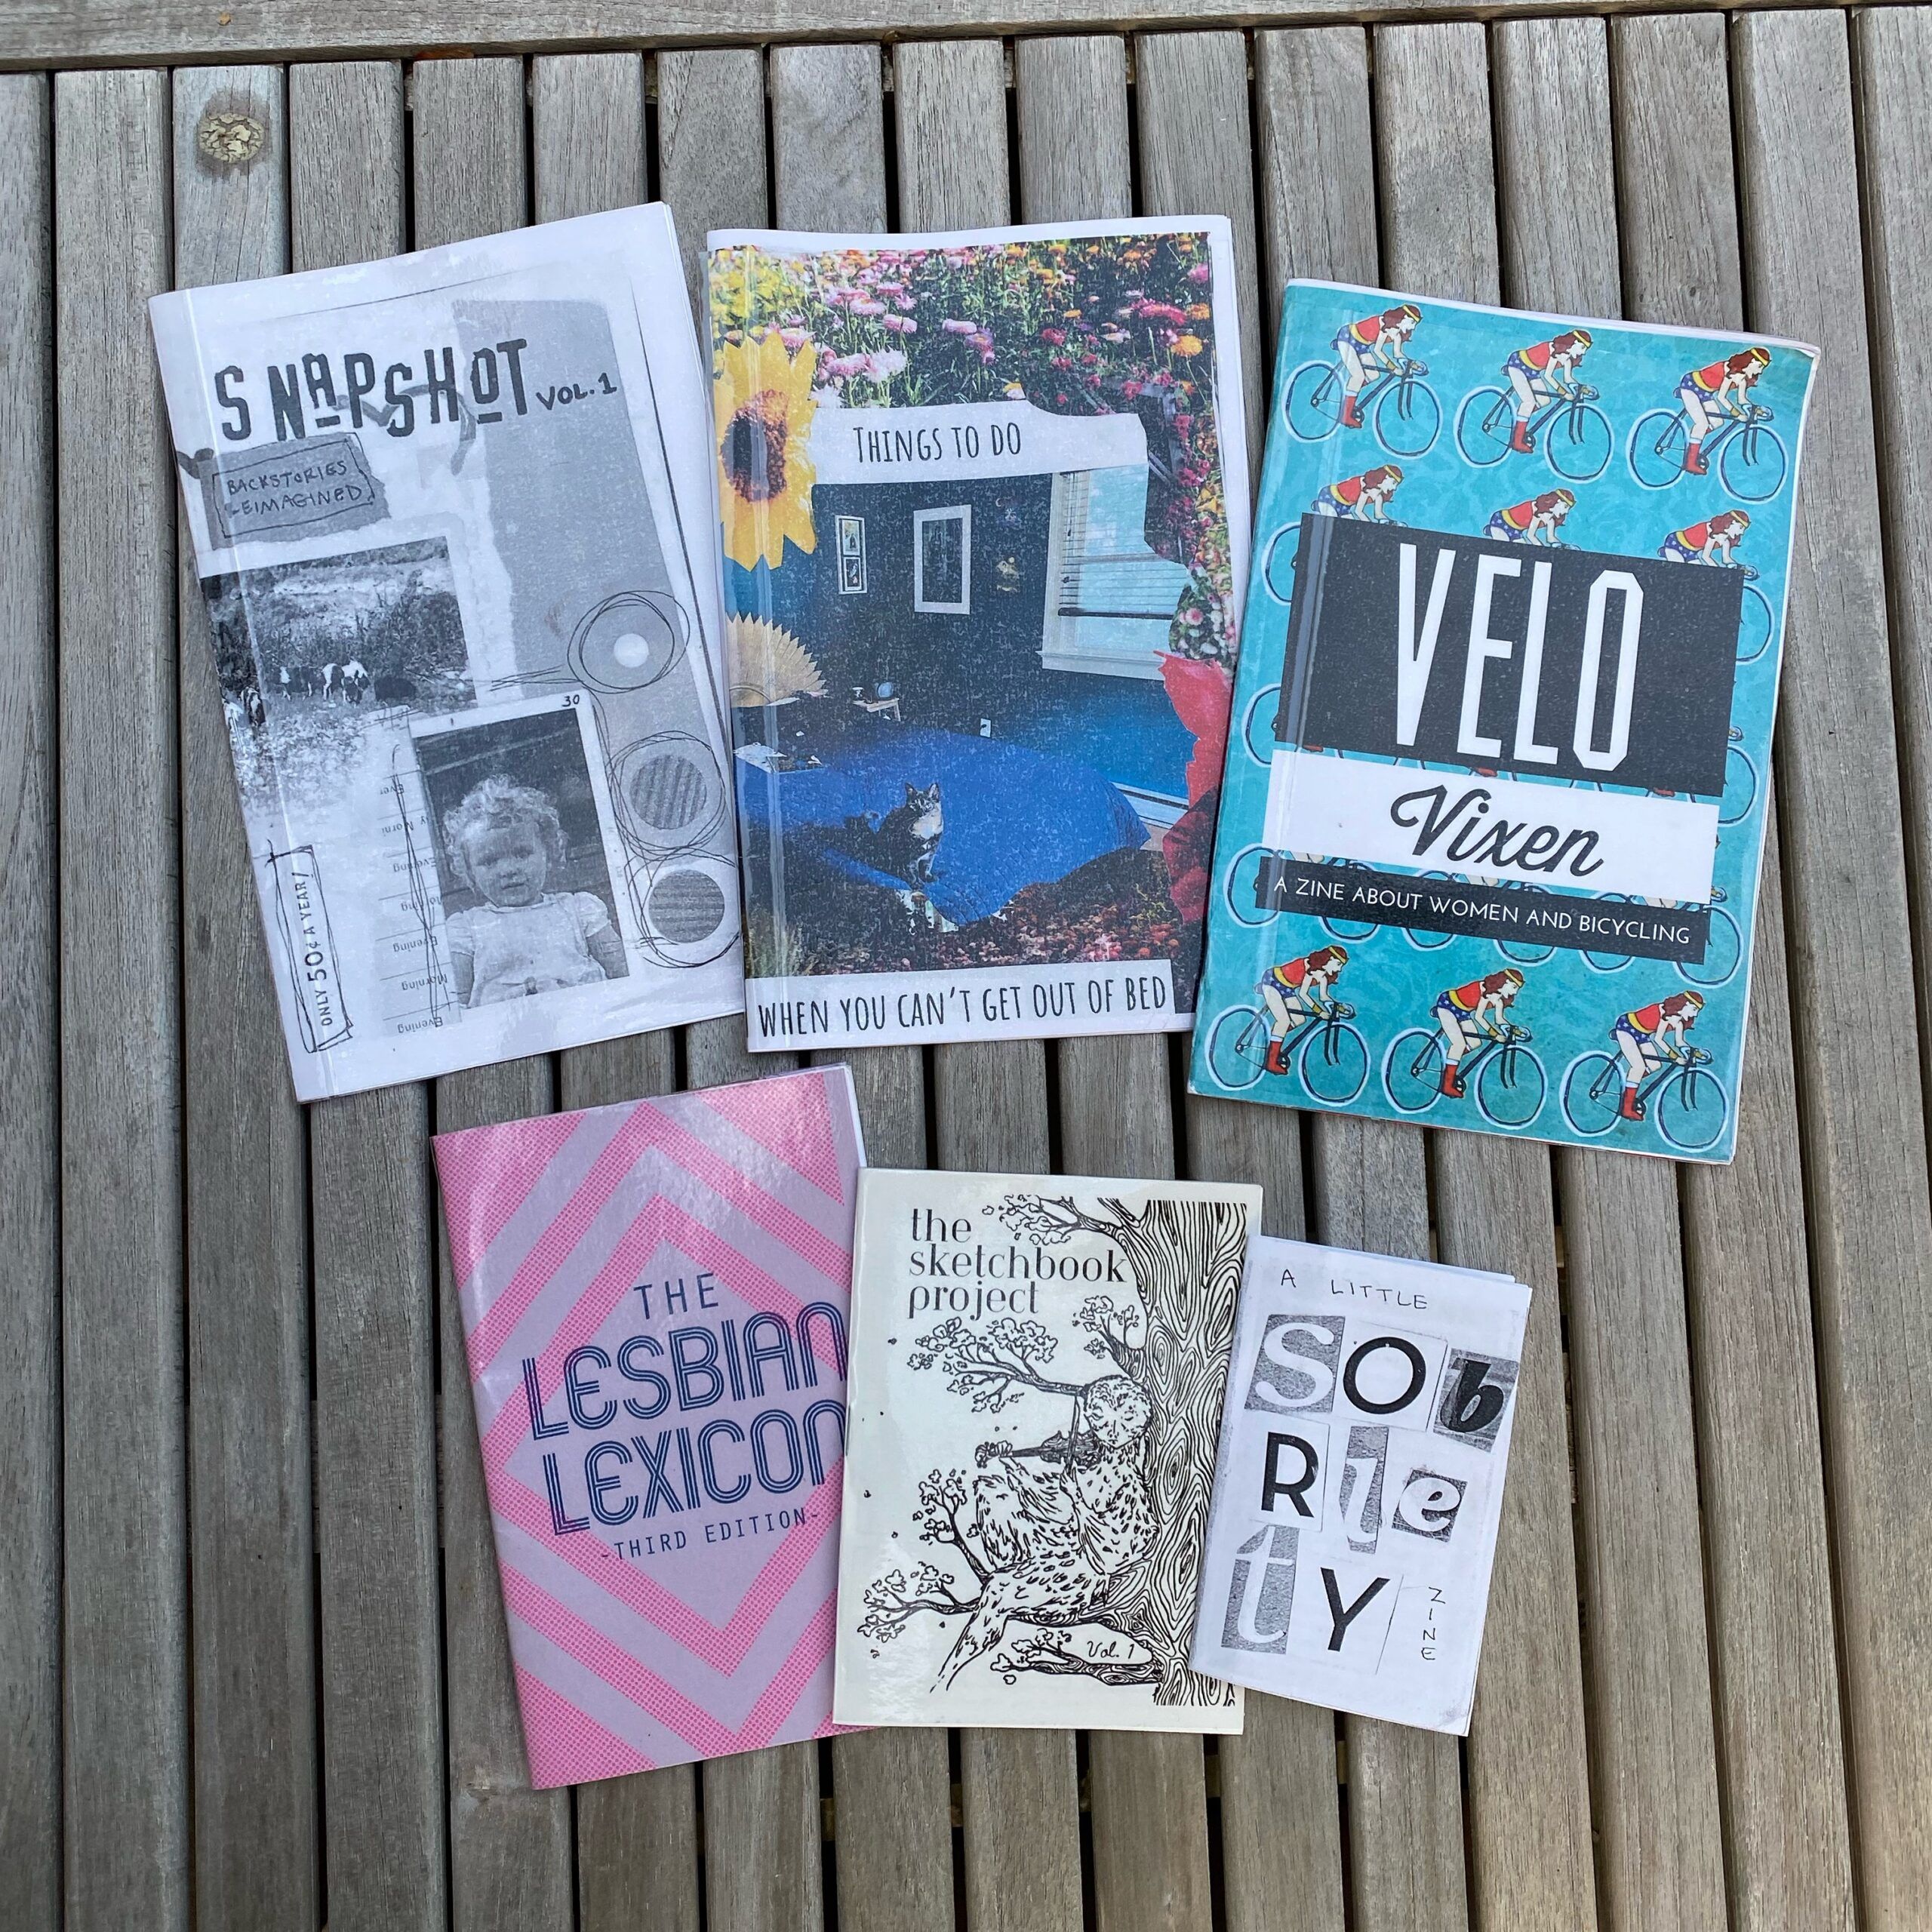 Six zines of different sizes and colors spread out on an outdoor table.